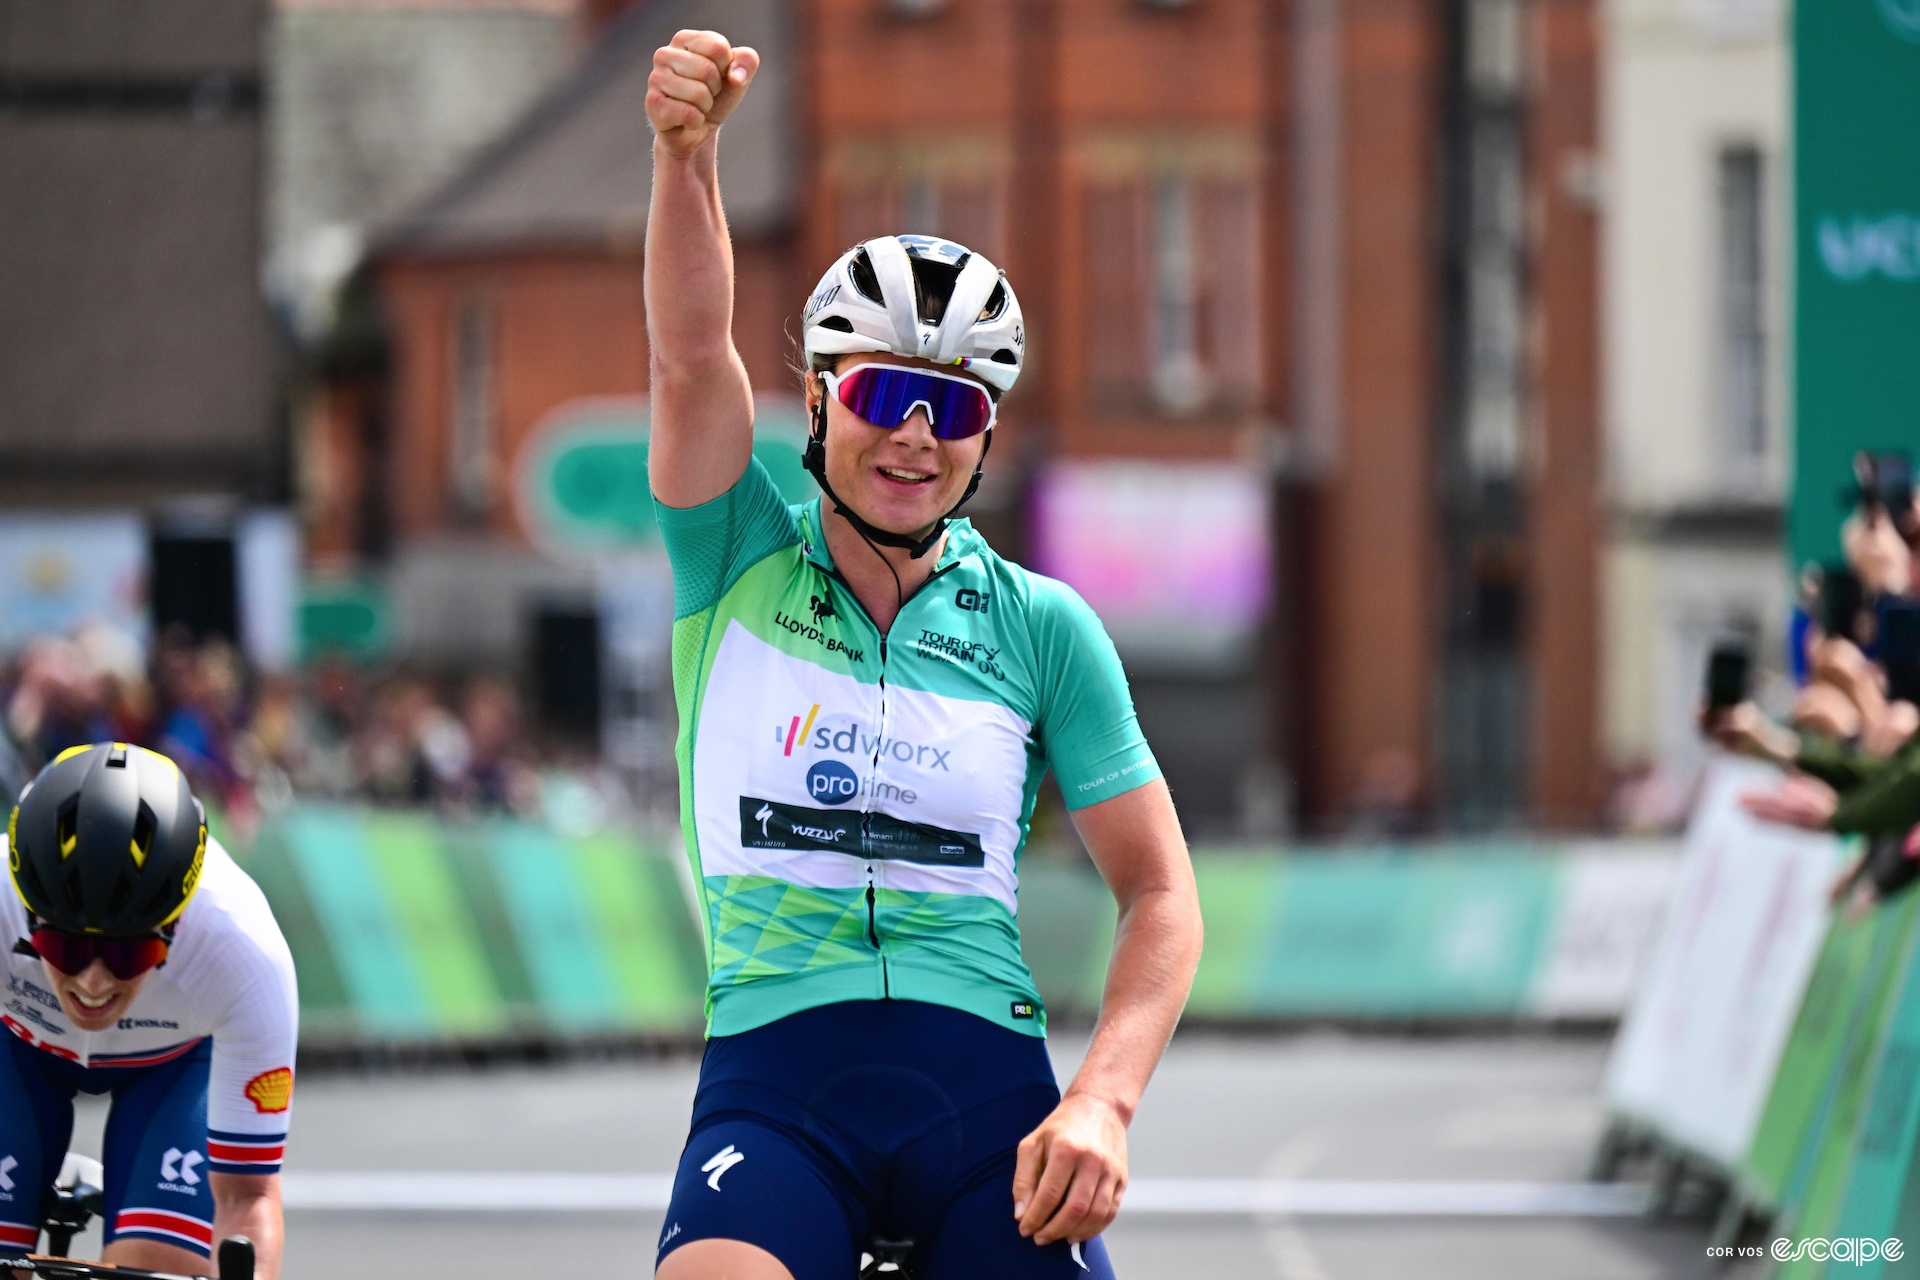 Kopecky raises one arm in victory, wearing the Tour of Britain leader's jersey.